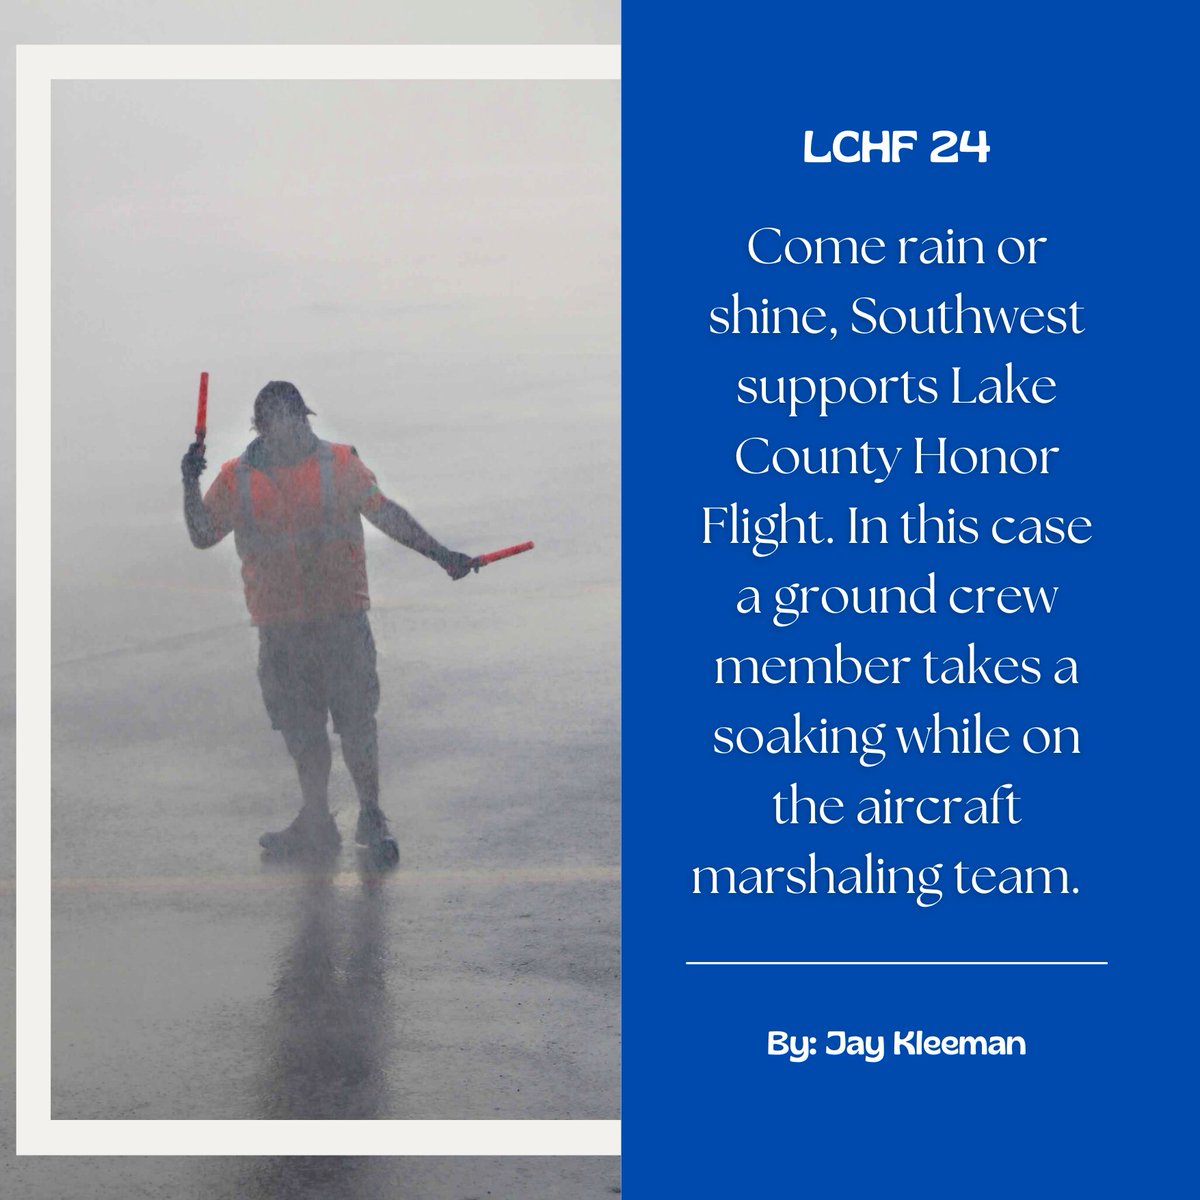 LCHF 24 - By: Jay Kleeman 
'Come rain or shine, Southwest supports Lake County Honor Flight. In this case a ground crew member takes a soaking while on the aircraft marshaling team.'
#lchf24 #honorflight #LakeCountyHonorFlight